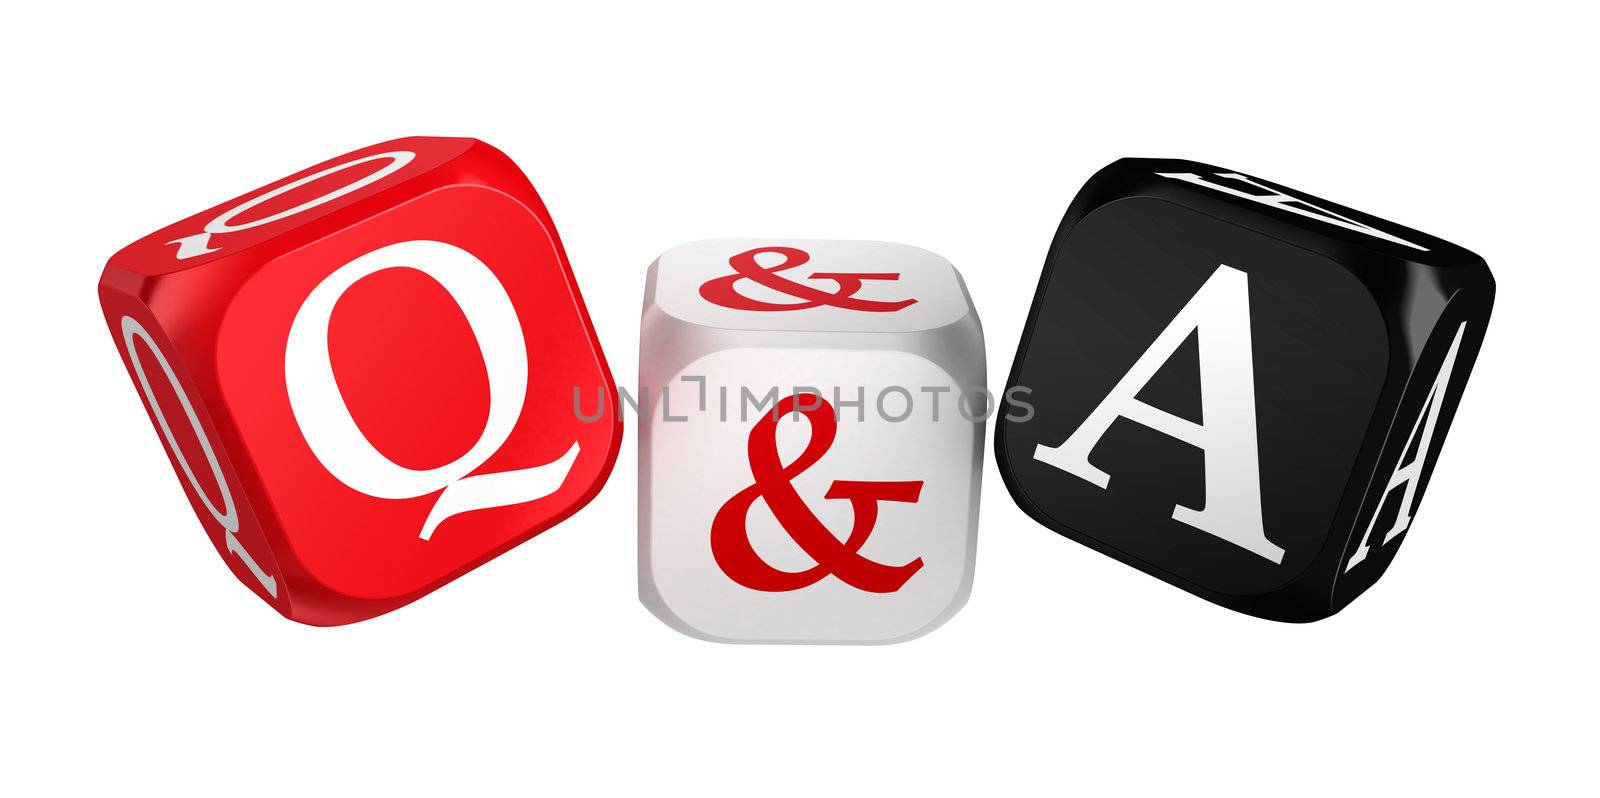 questions and answers red white black dice isolated on white background